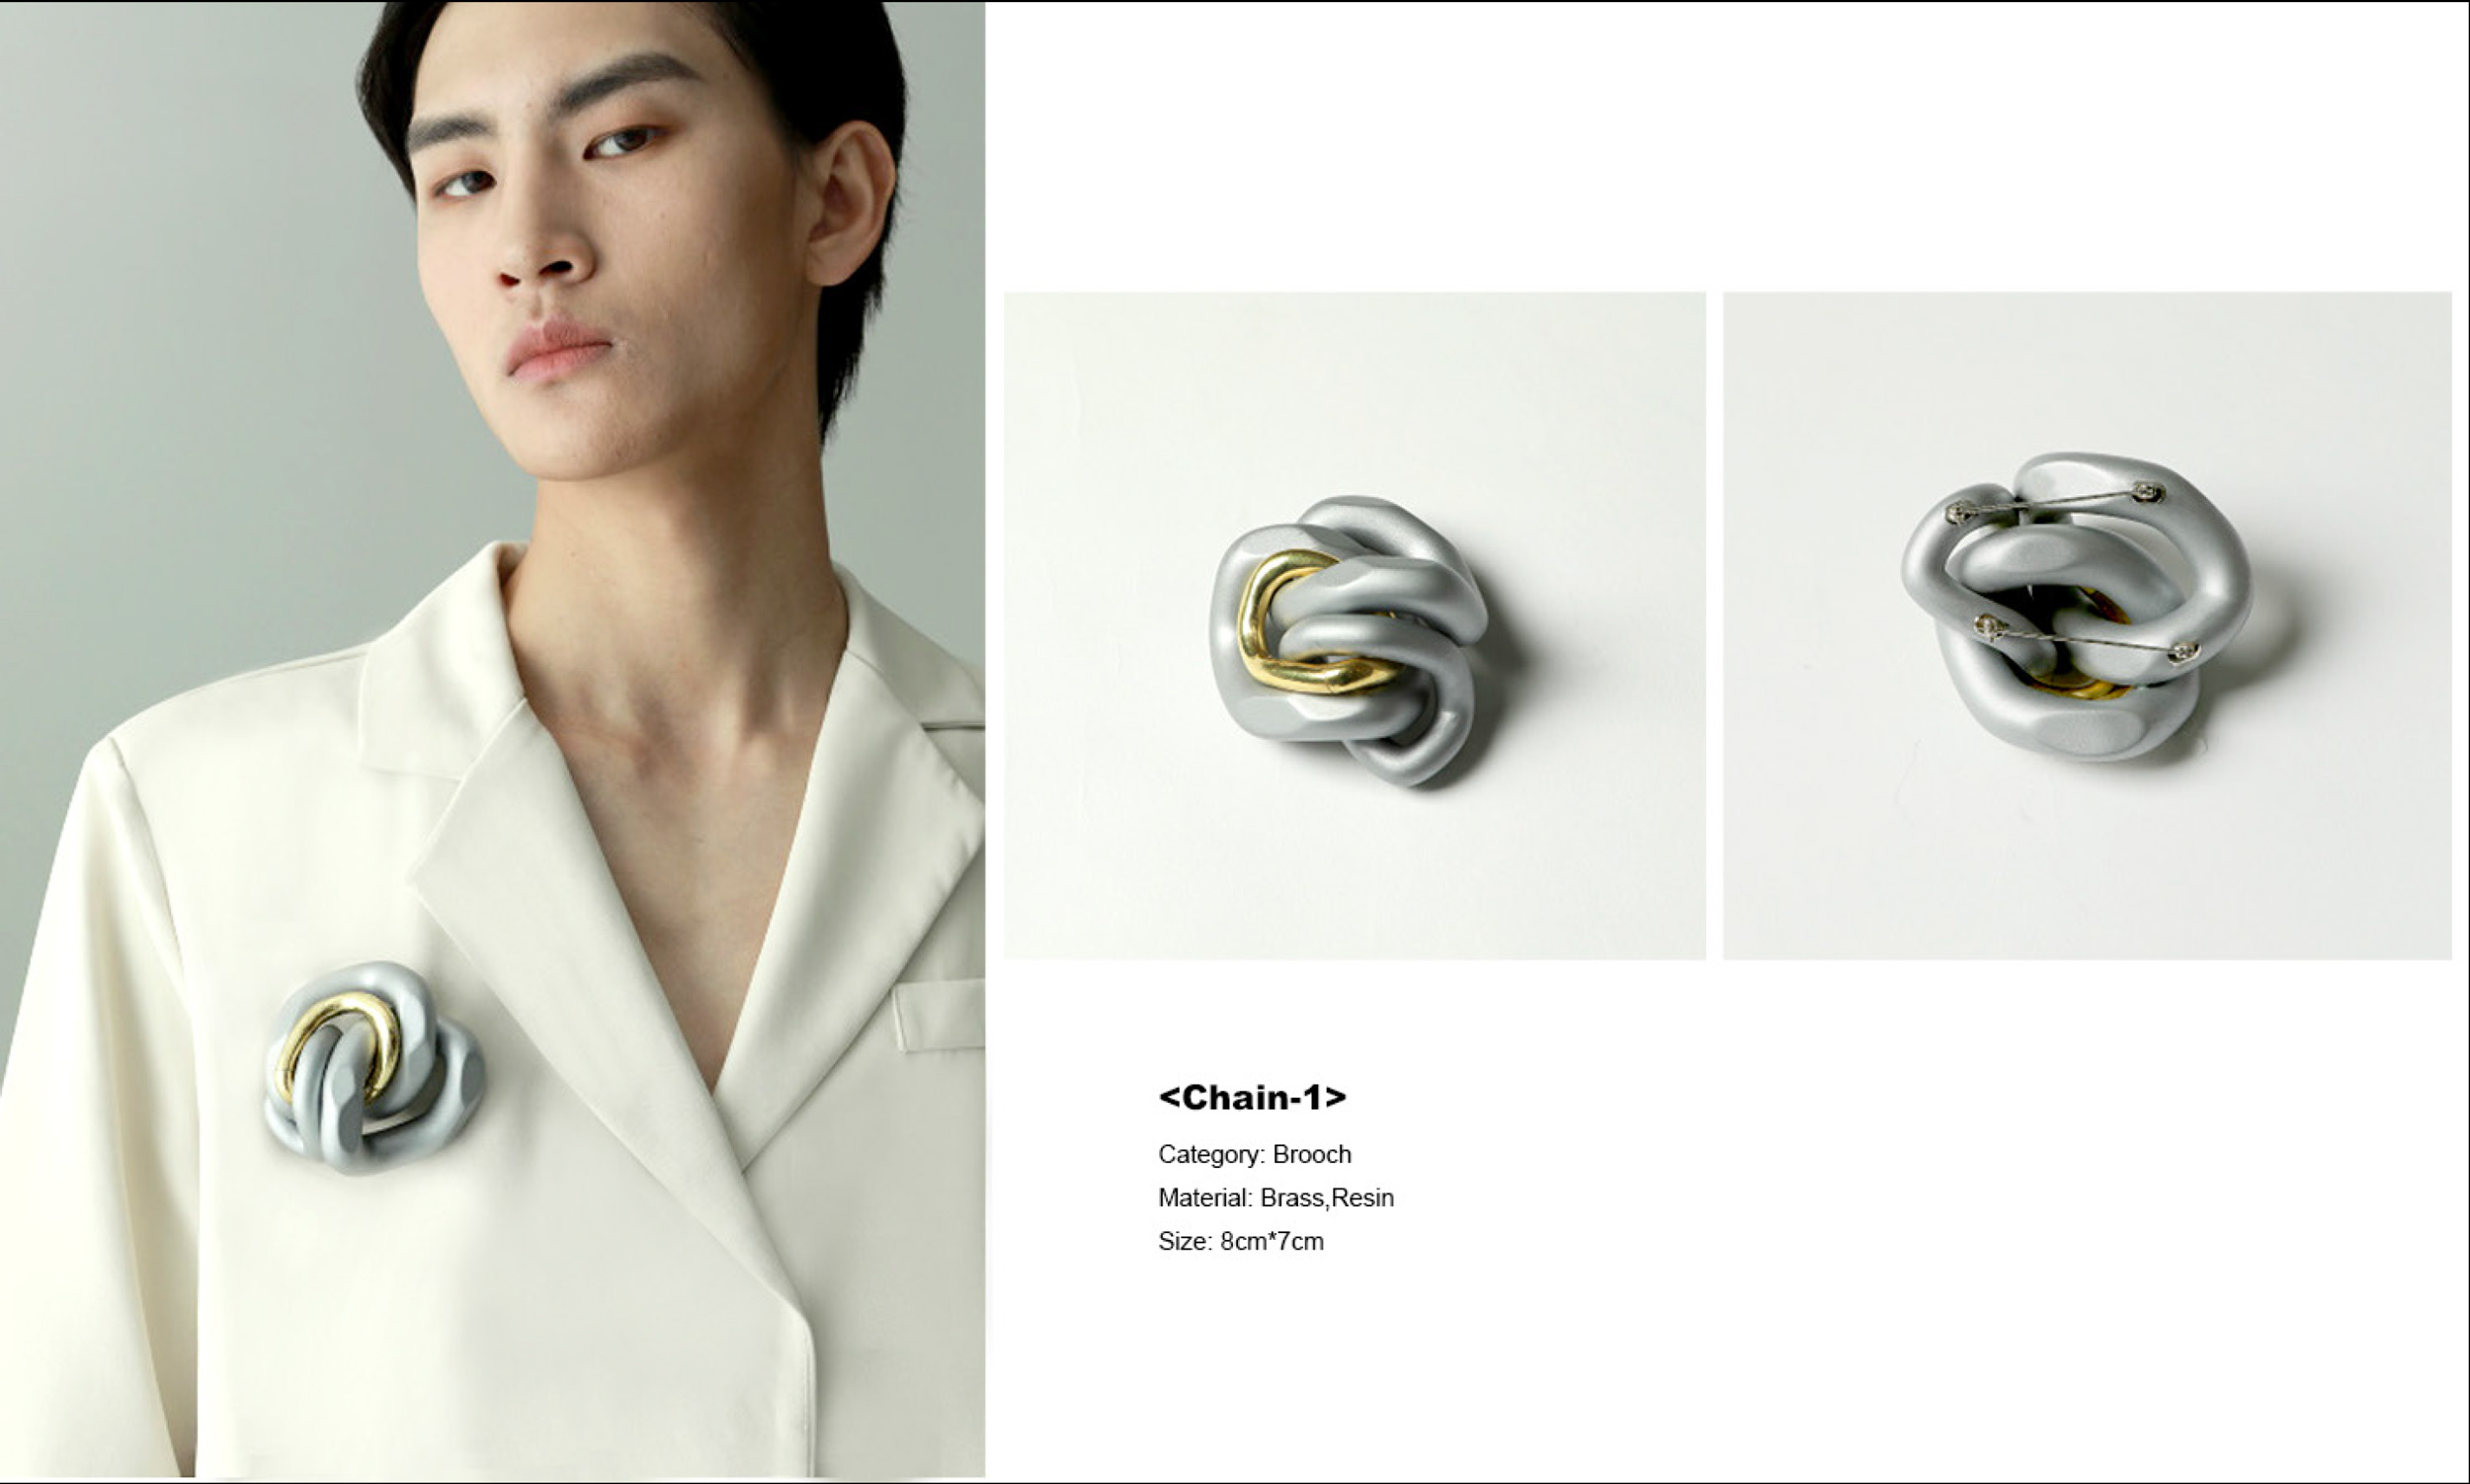 A photograph of a male model wearing a white blazer with a large metal looking chain broach. The model is a young Chinese man. The image also features two additional photographs of metal chain style broaches.